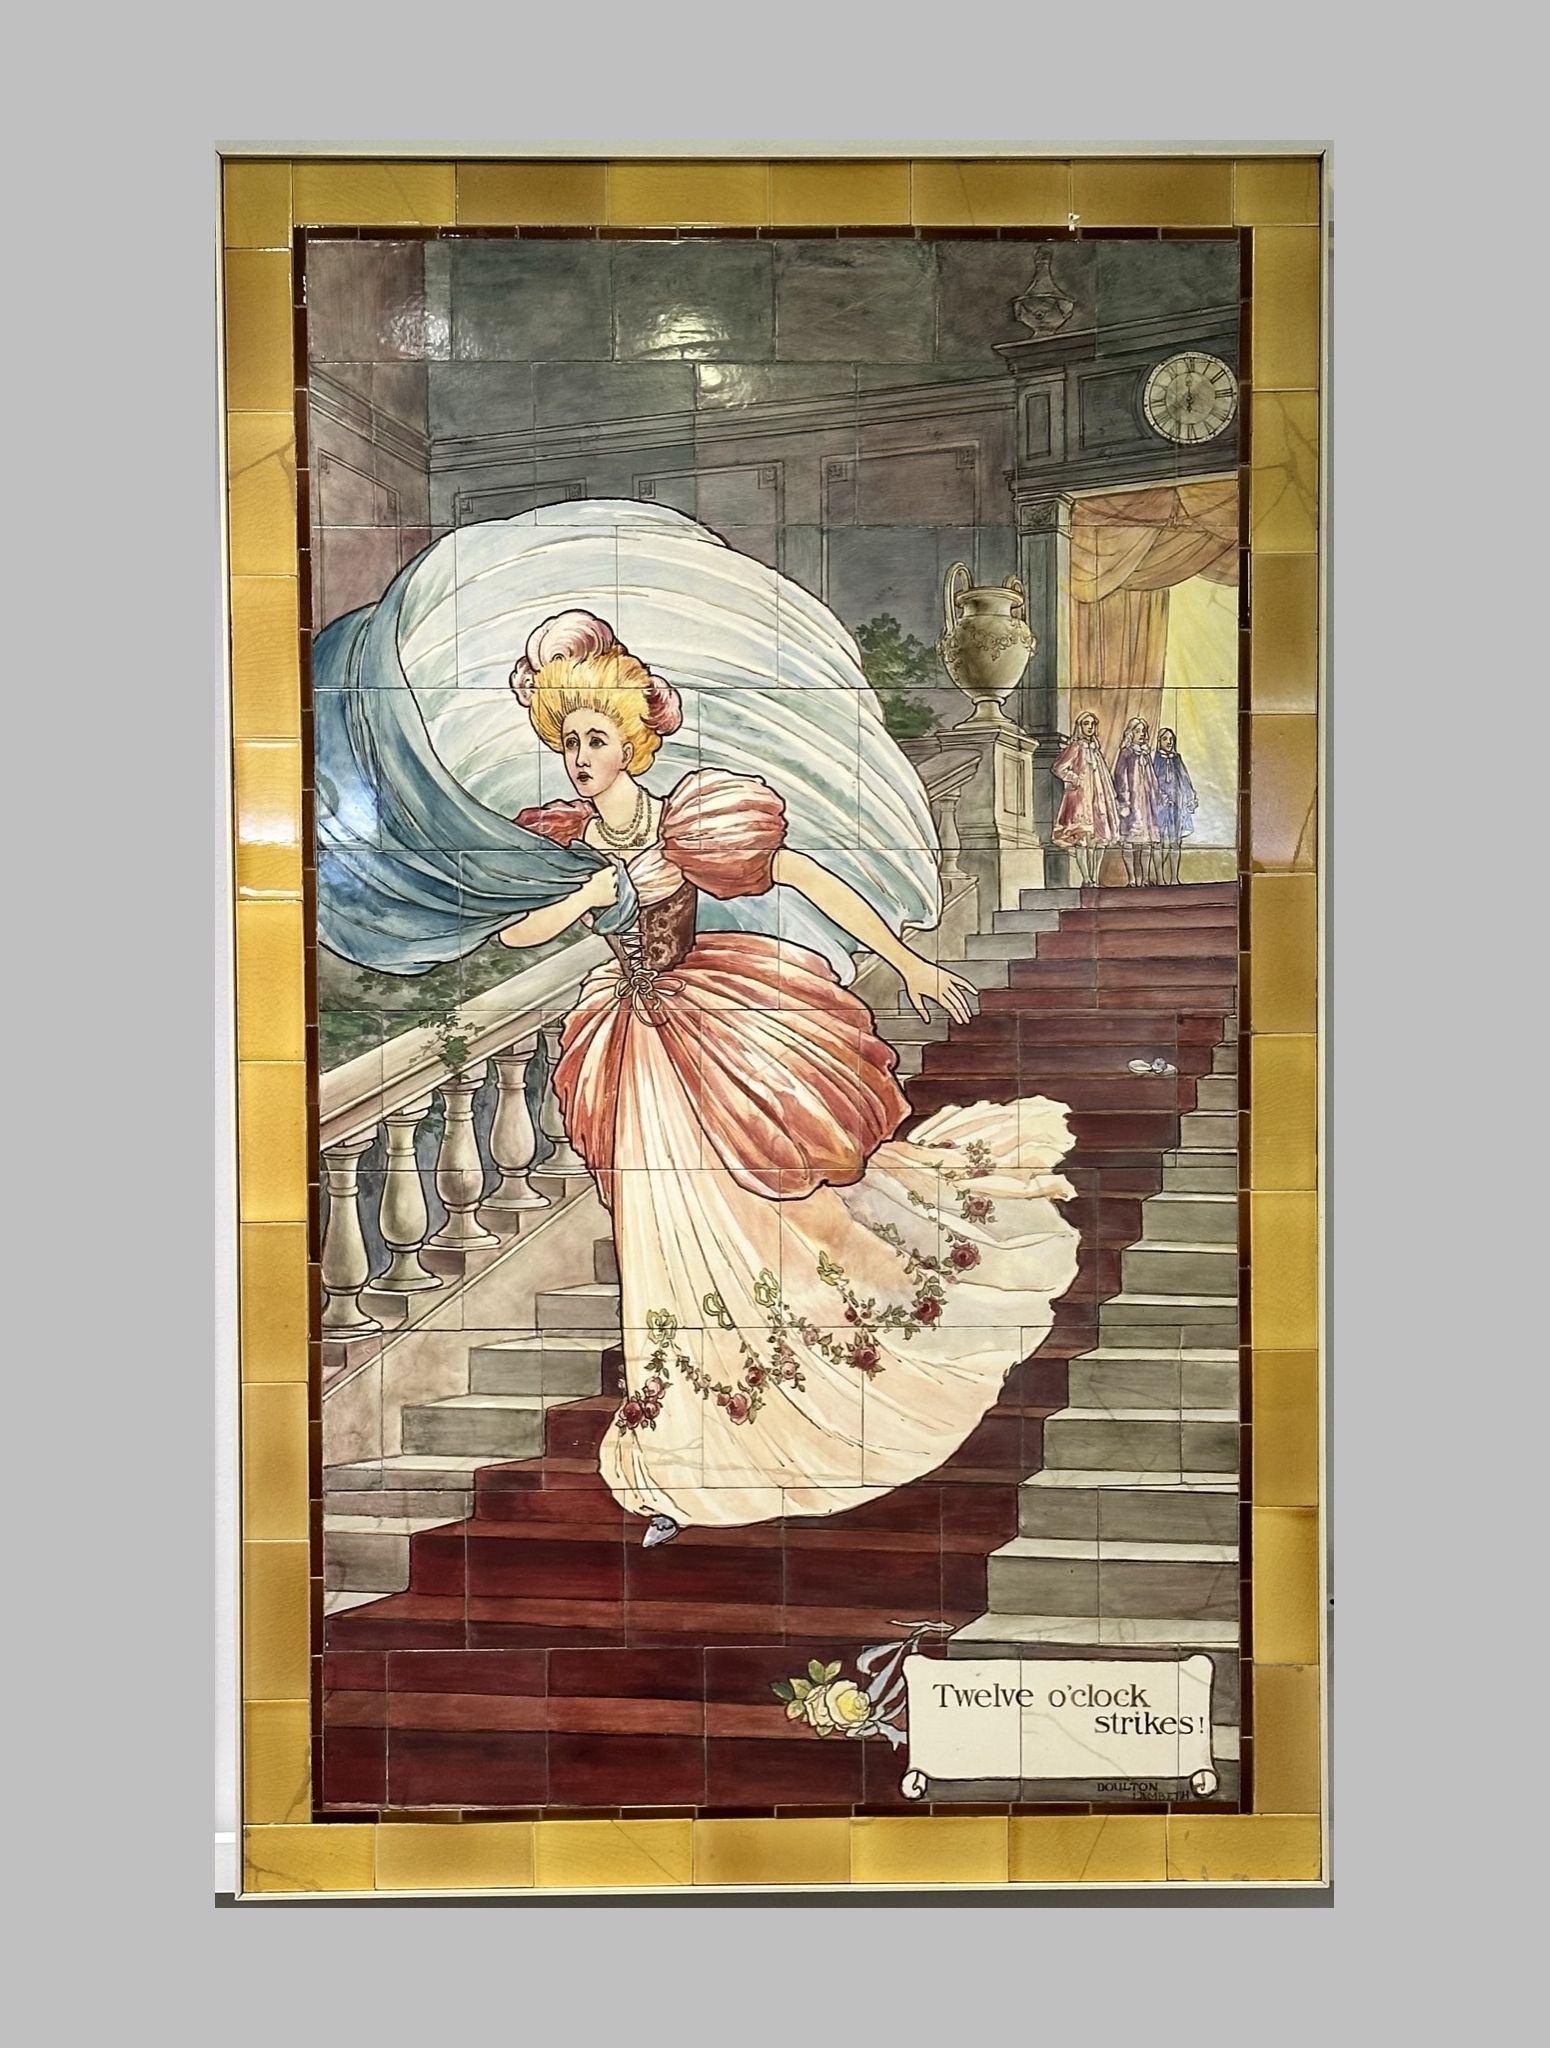 Cinderella scene painted on Doulton tiles (commissioned around 1900) from the Evelina Children's Hospital displayed in the long corridor of St Thomas' hospital.